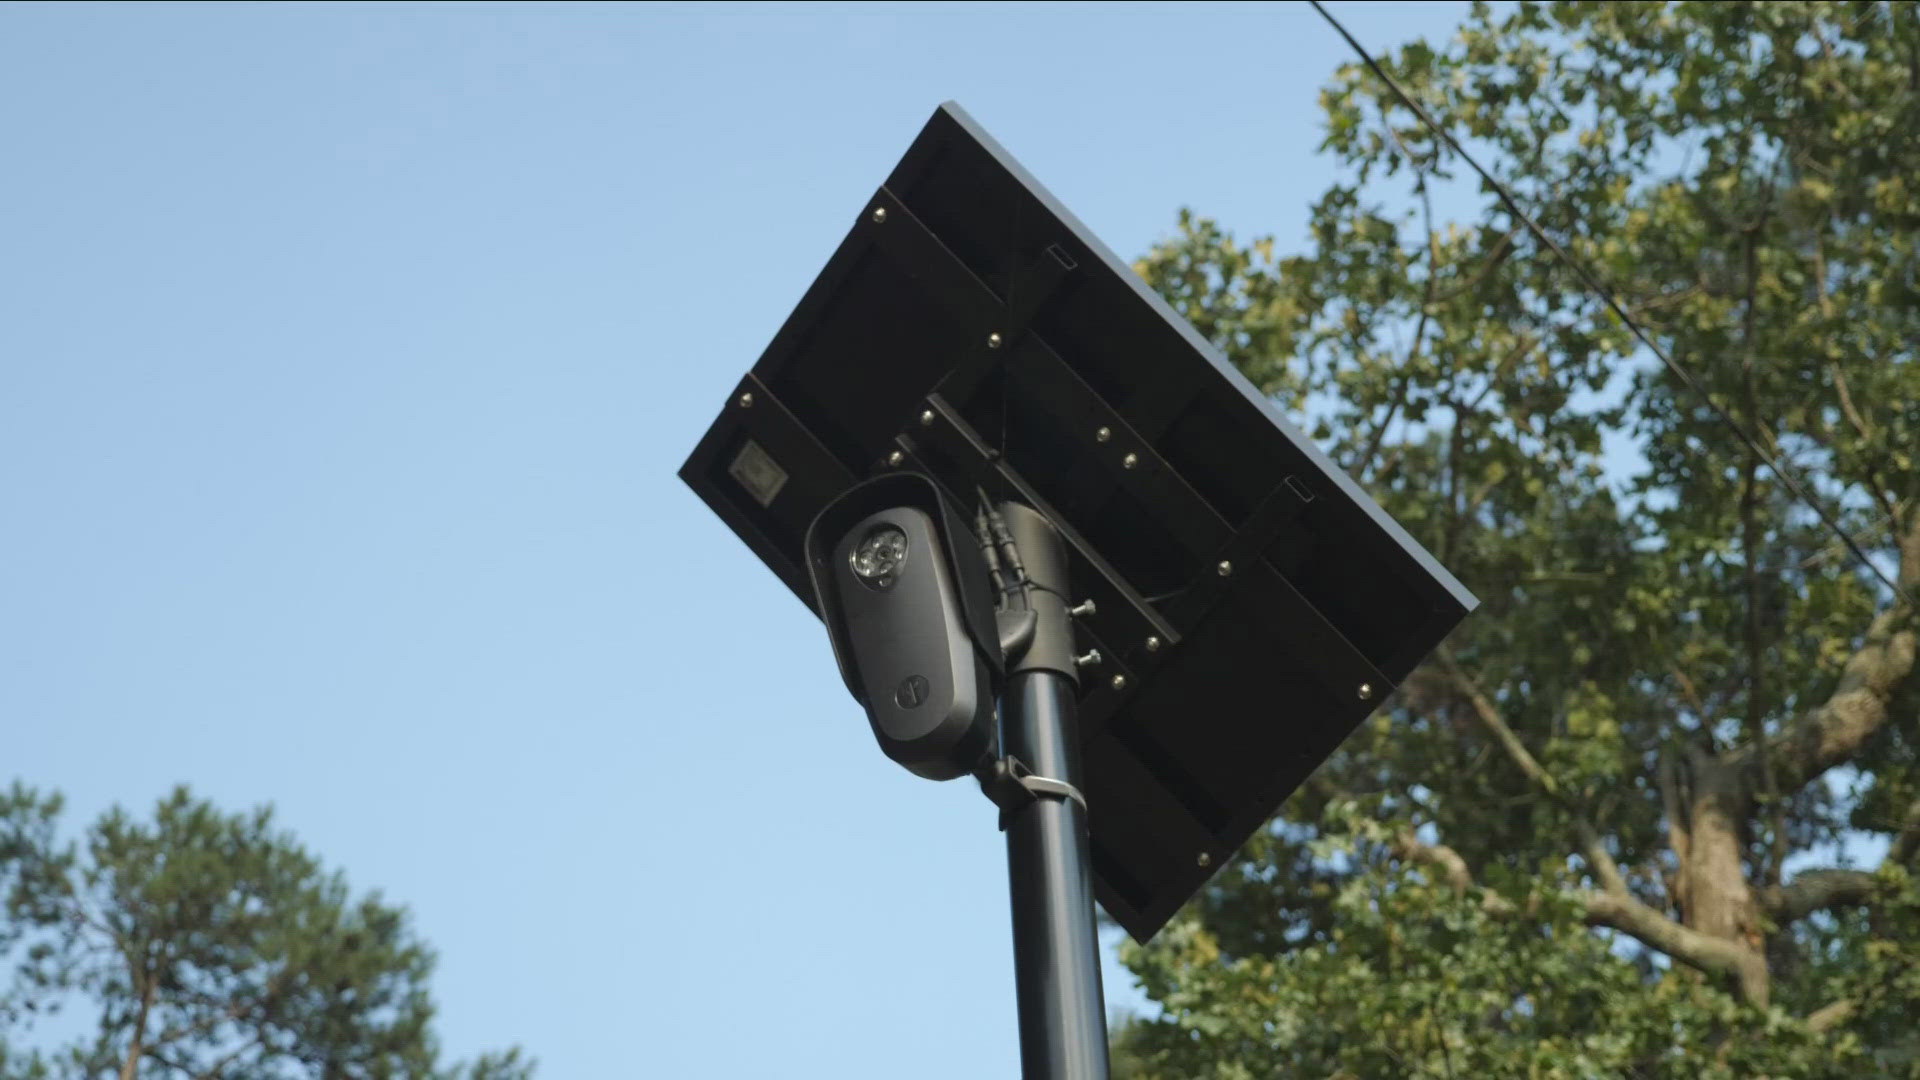 The Flock Safety system is an automated camera that captures a vehicle's plate number as soon as it drives by.